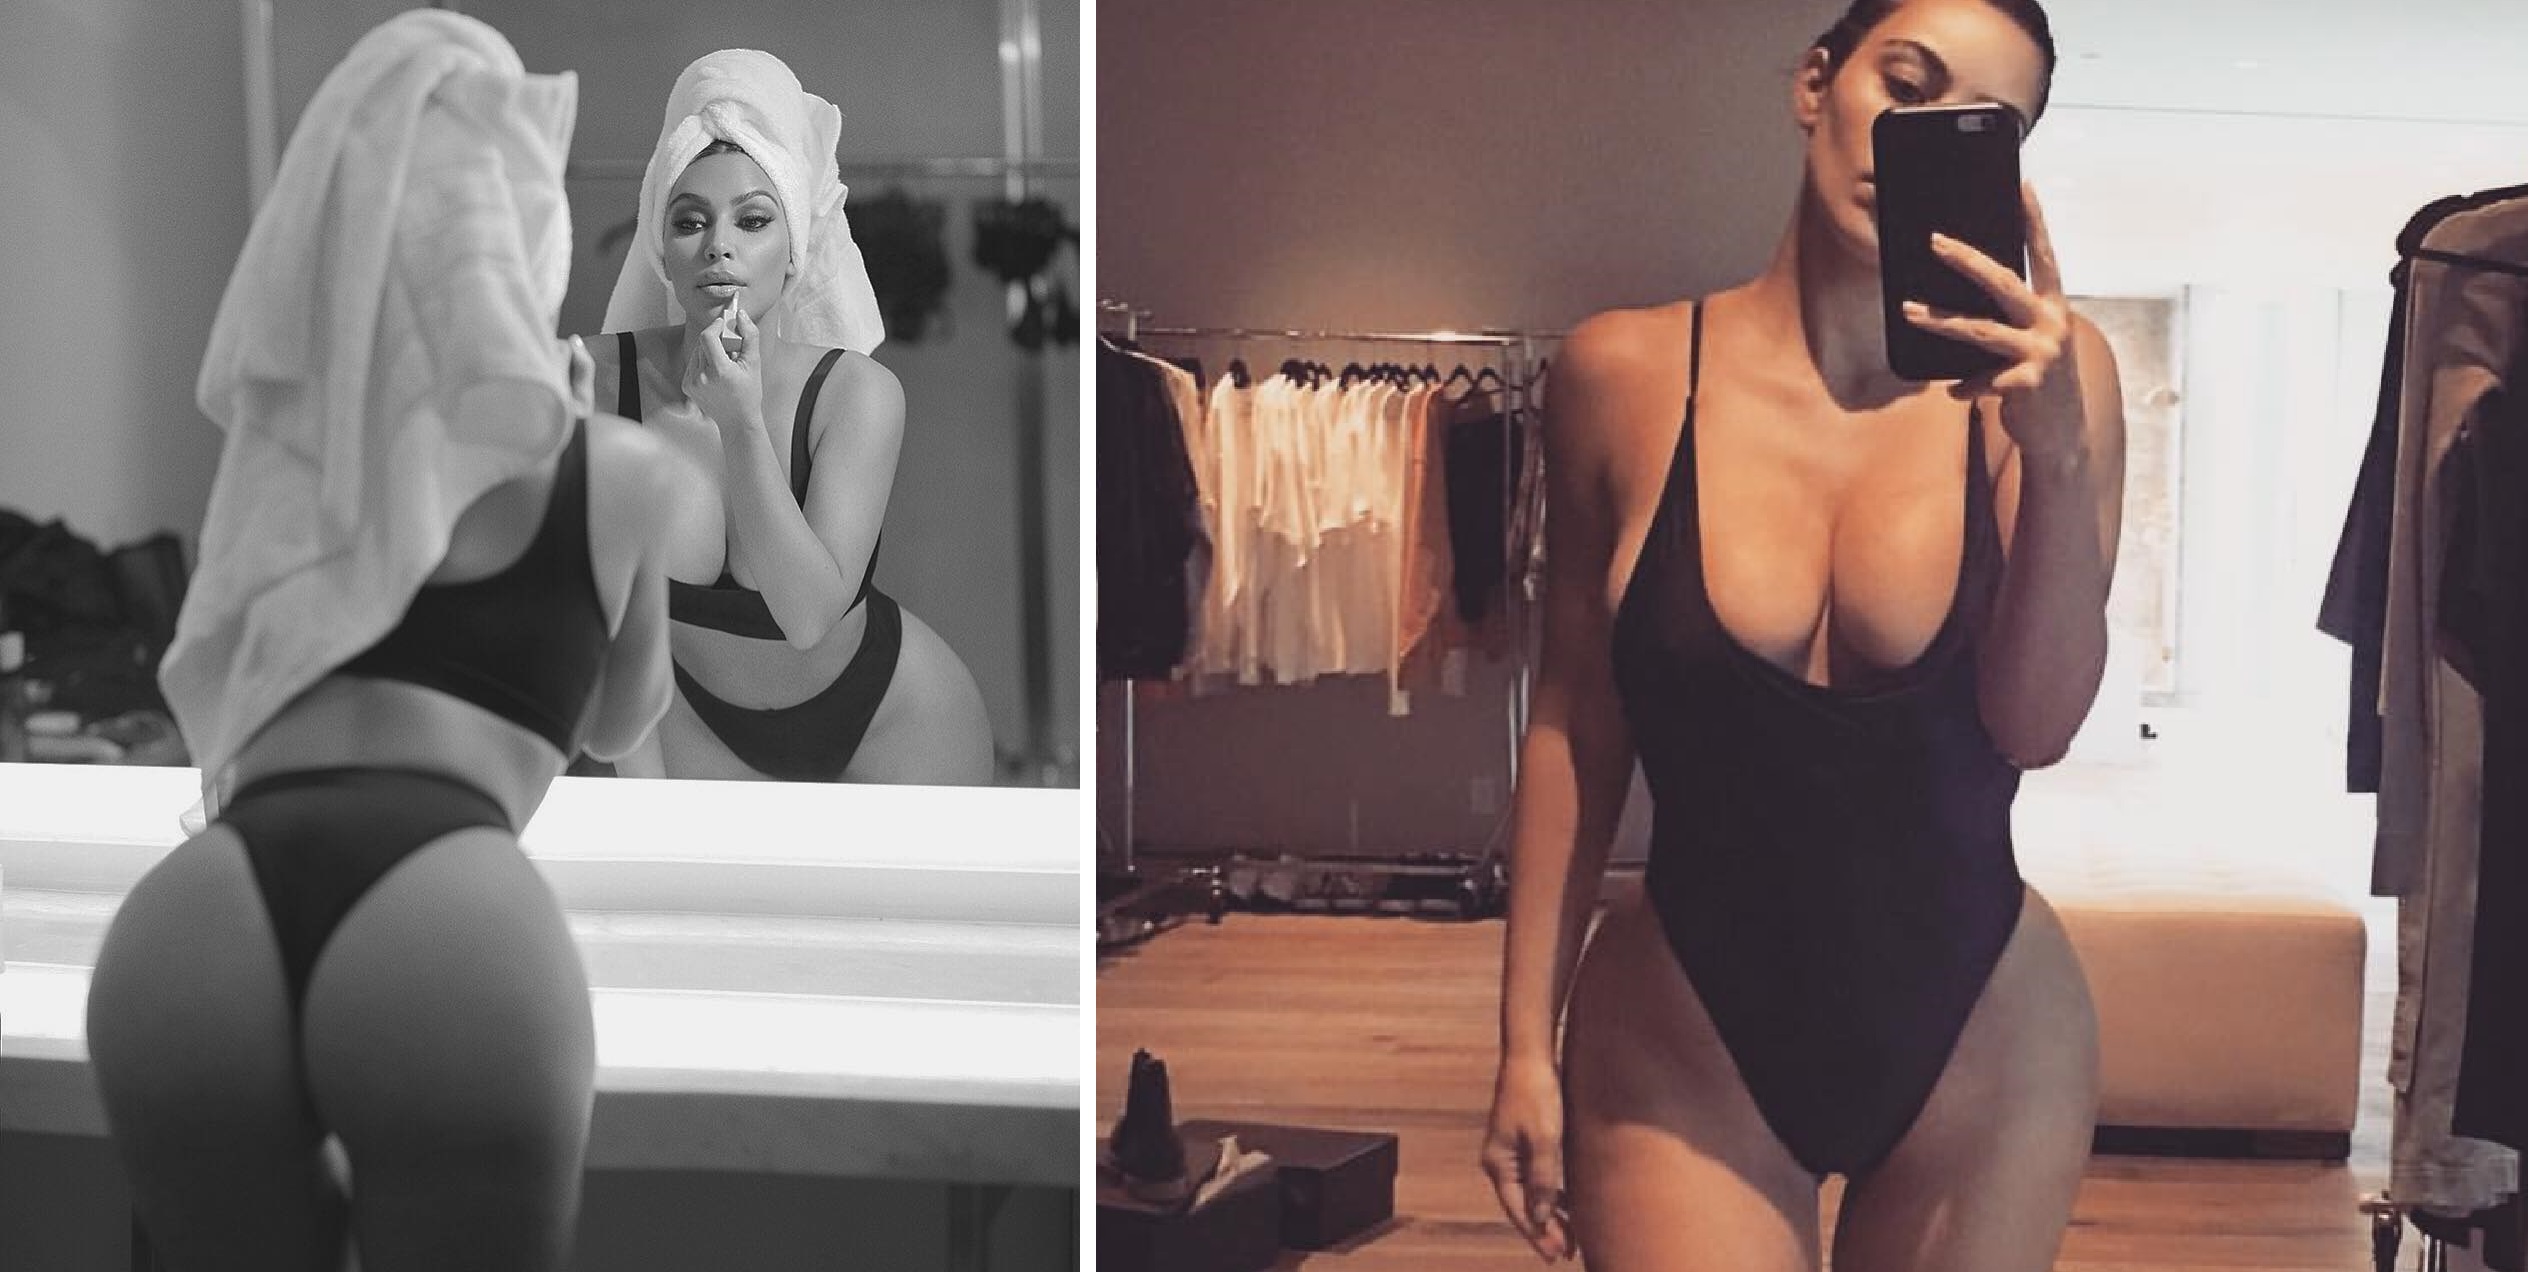 The Sexiest Pictures Of Kim Kardashian From Her Instagram!